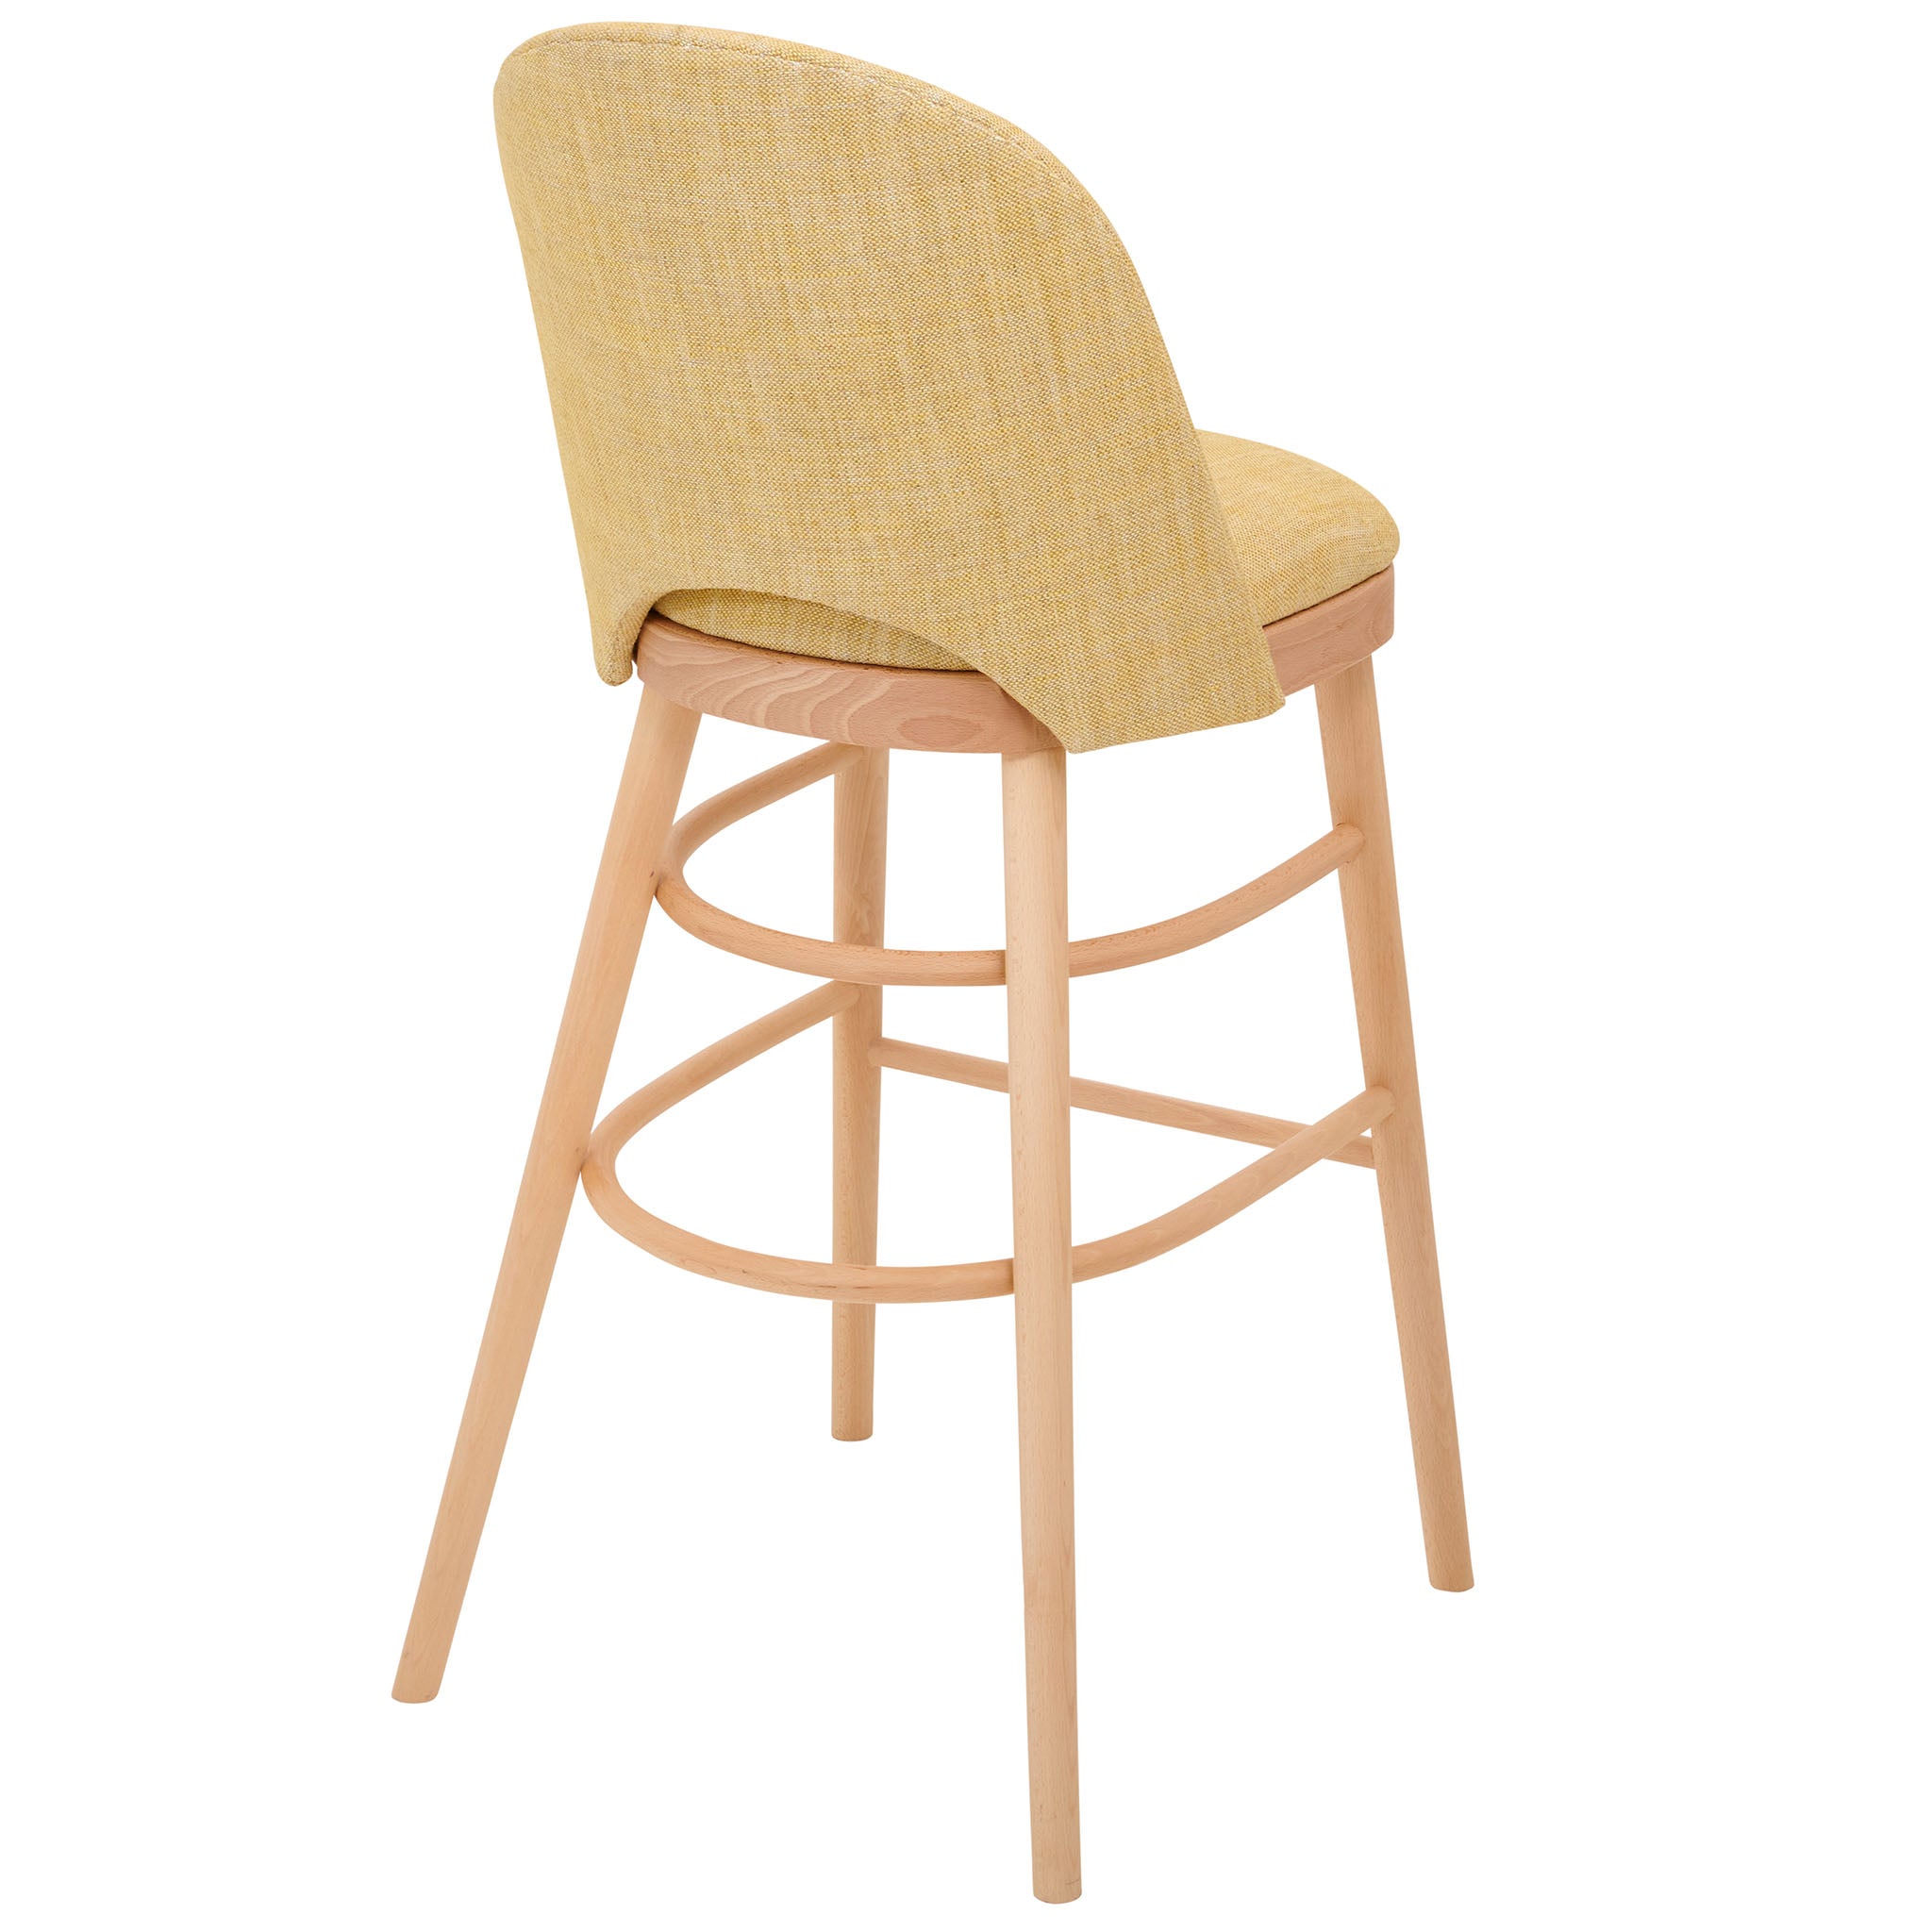 Ella Bar Stool in the Textured Linen Old Guilding from Fermoie